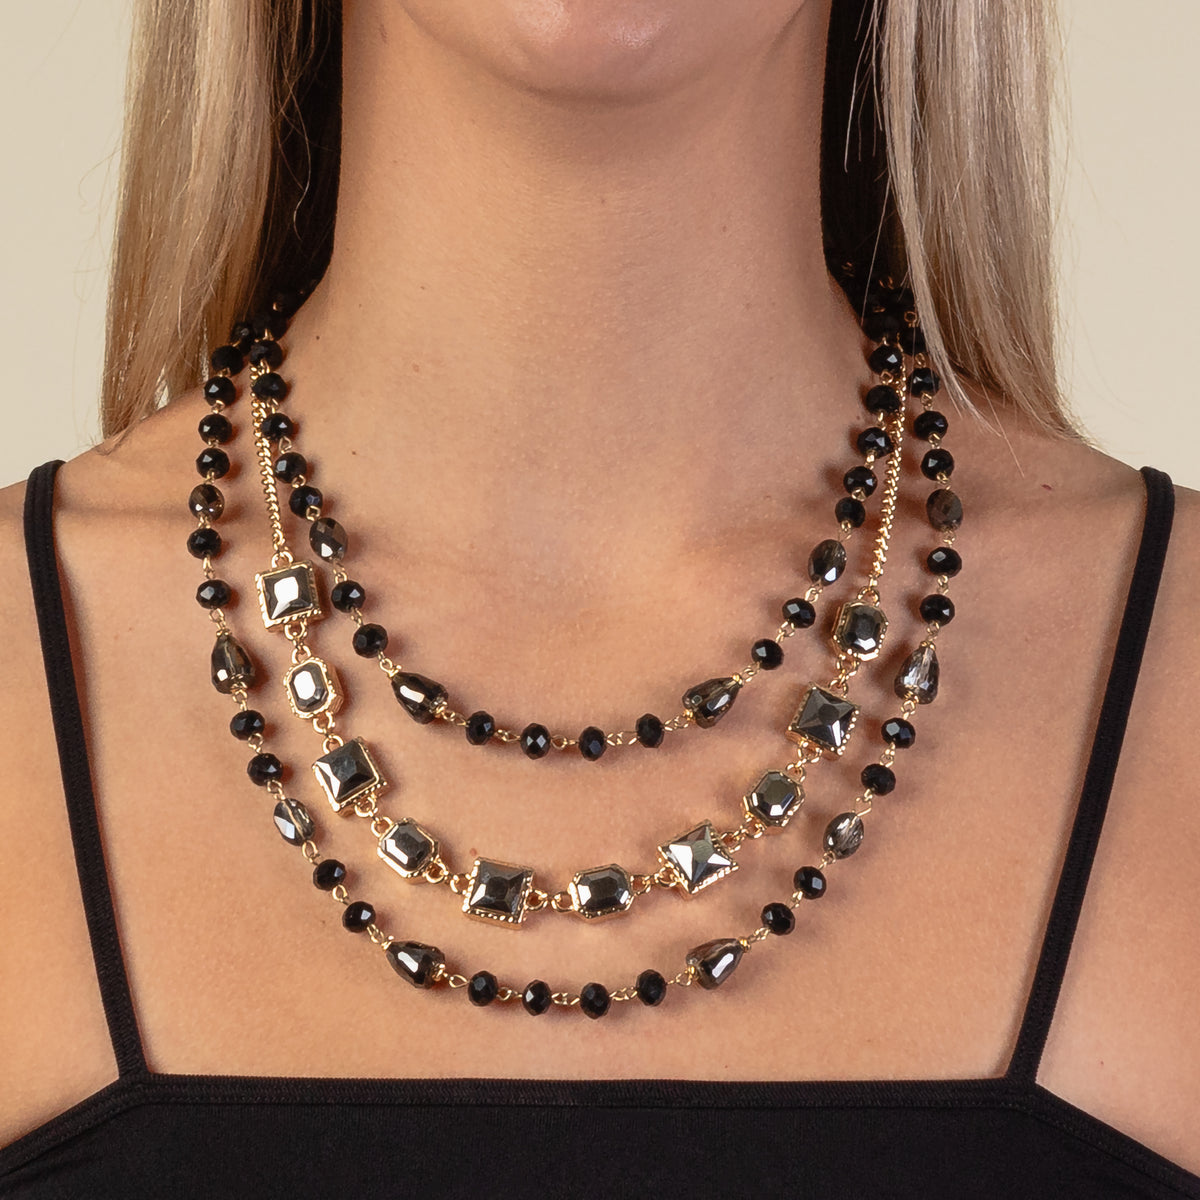 1206 - Layered Beaded Necklace - Black